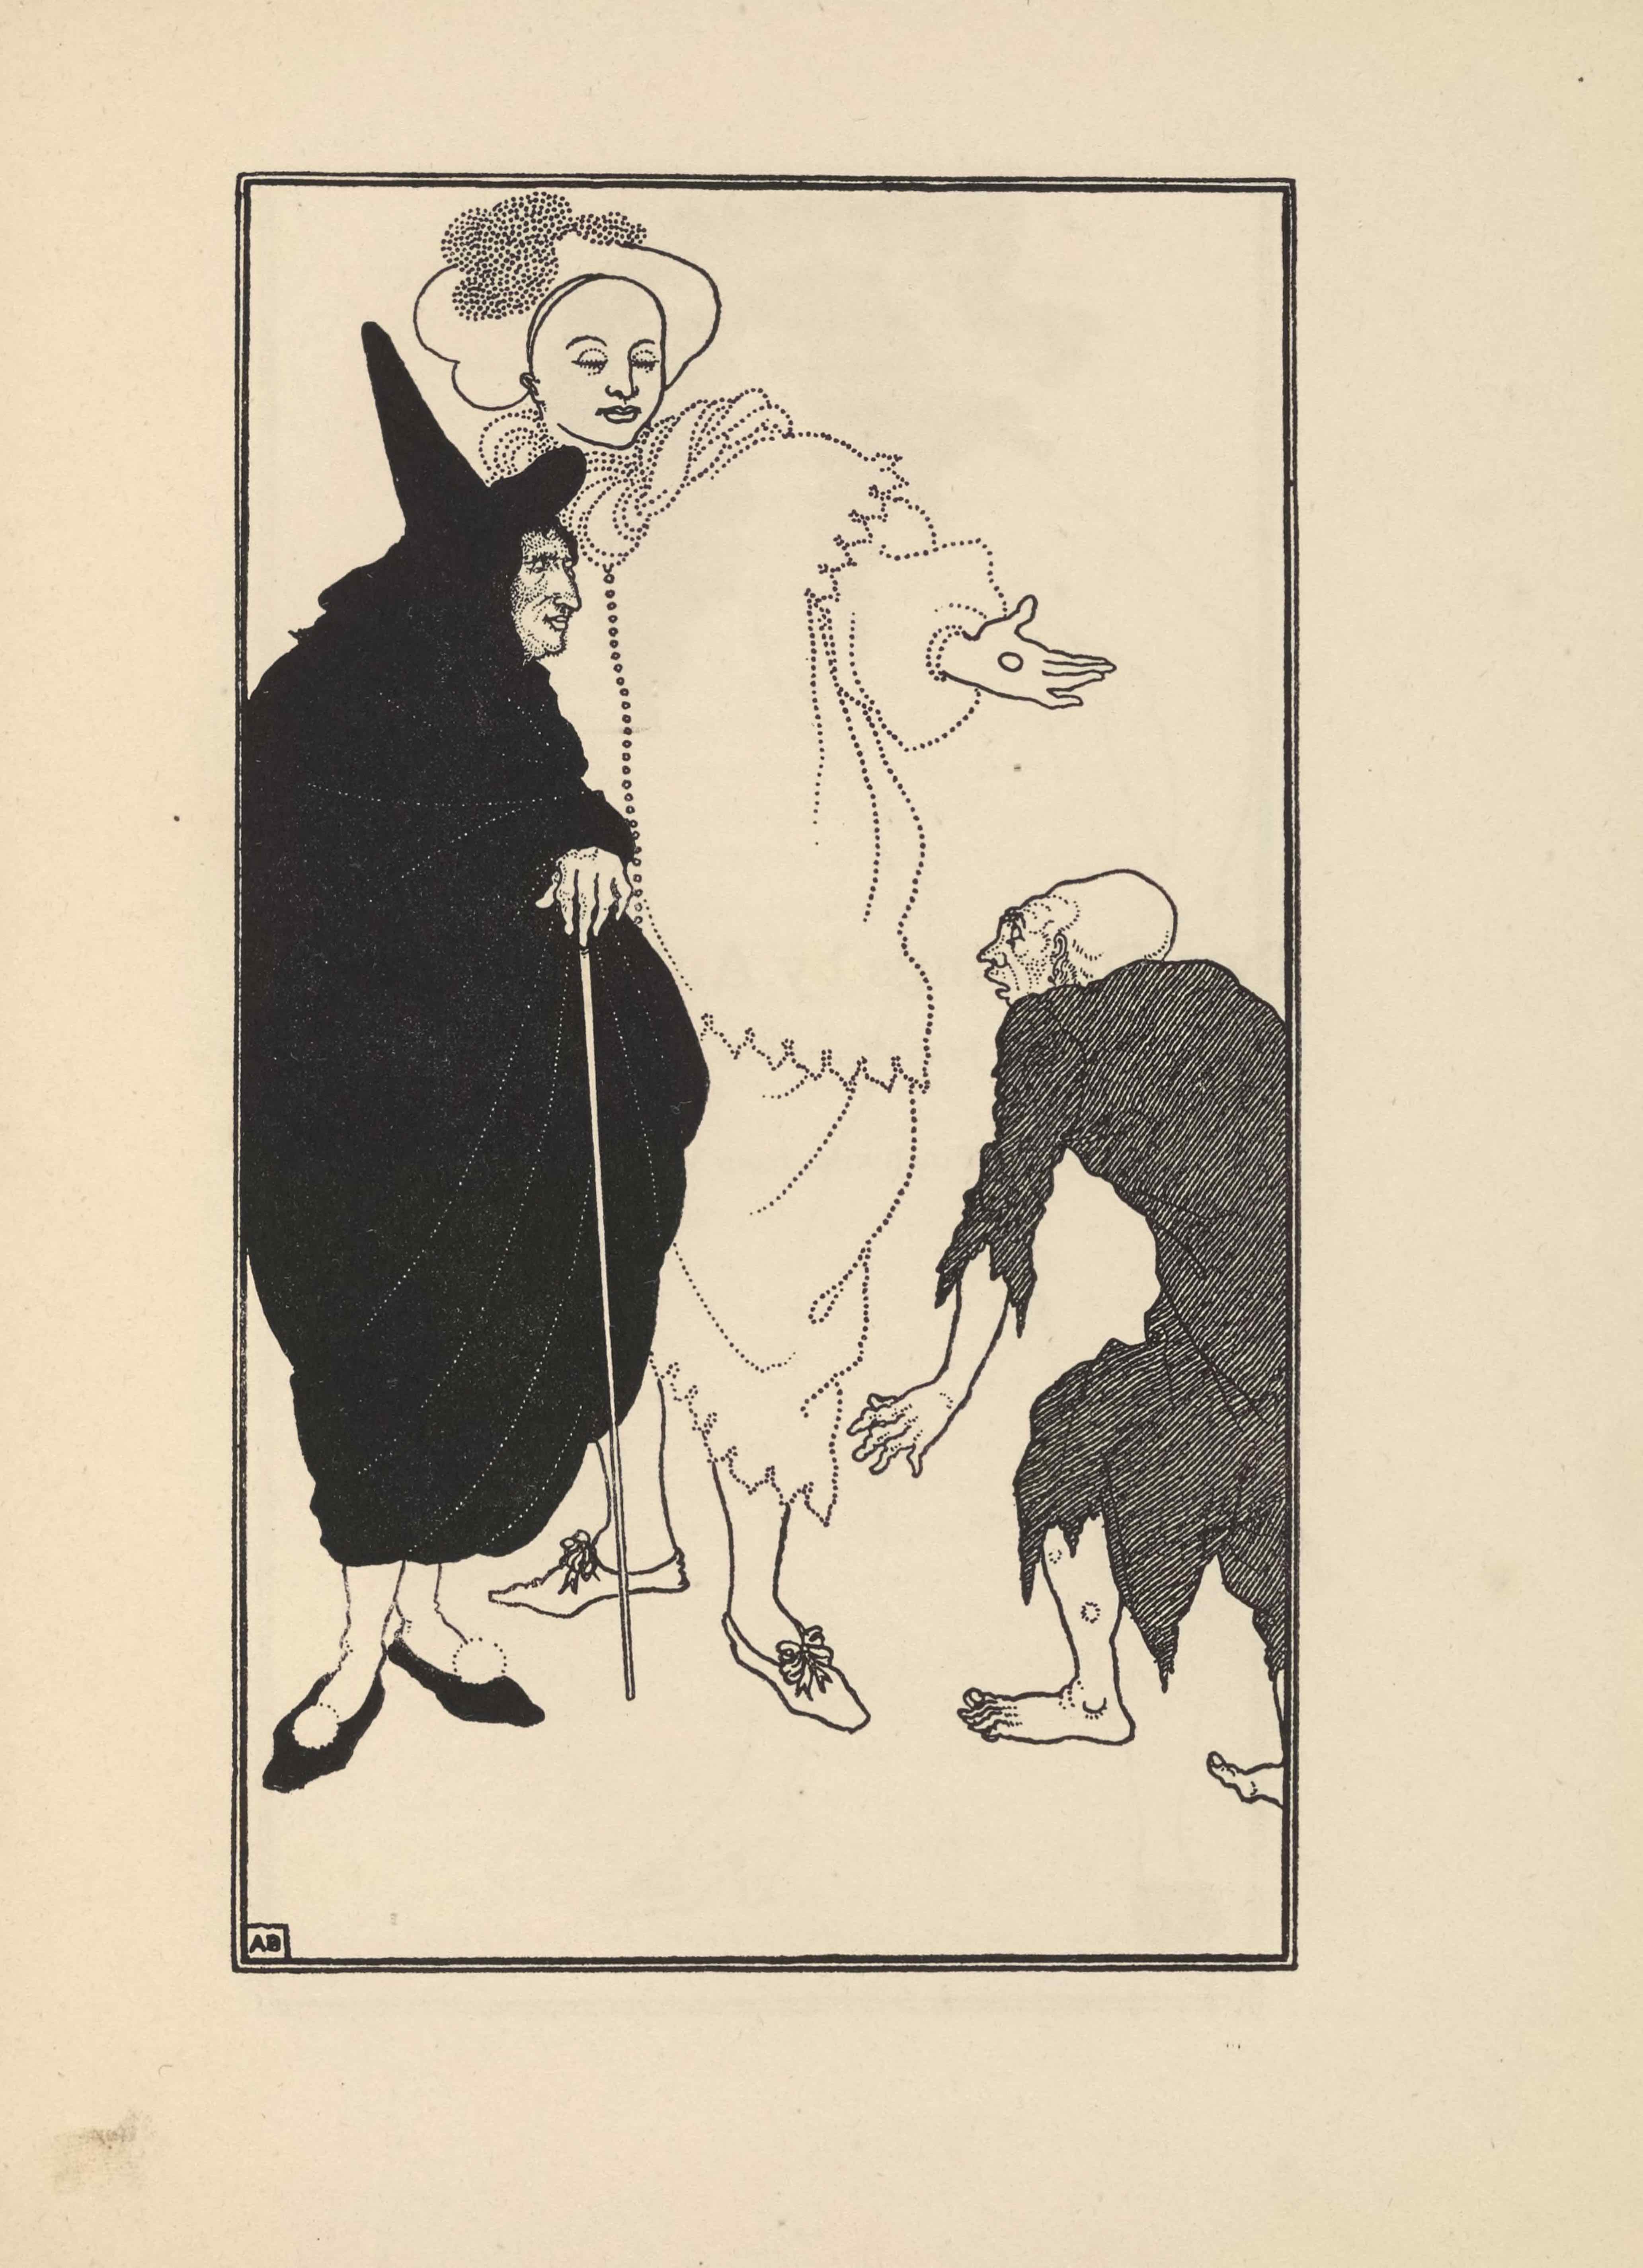 The line-block reproduction of Beardsley’s pen-and-ink illustration is framed in a double-lined border and is in portrait orientation. In the bottom left corner of the image is a small box with the artist’s initials: “AB.” The illustration consists of three figures on a blank background. The leftmost figure is Sganarelle, servant to Don Juan, disguised as a doctor. He is dressed in a loose black cloak which extends down to his lower calves and faces right. His hands are crossed under his draped chest and his right hand extends from its sleeve, gripping a straight and narrow cane. He wears a black conical hat and black slippers with white balls where laces would normally be. Standing behind and to the right of Sganarelle is Don Juan, disguised in a country costume. His white hat, stippled around the crown, almost reaches the top border of the illustration. His clothes are all white; the fabric is drawn with stippling at the edges and creases. His loose tunic is long sleeved and tiered so that it has a division at the shoulders. Both the shoulders and the hem of the shirt follow a uniform jagged pattern. Don Juan’s trousers are loose and extend down to the calves; they are drawn via the same stippling technique and feature the same jagged pattern at the bottoms. Only his left pant leg is visible as his right leg is behind Sganarelle. He has white slippers on that feature ribbons in bowties for laces. His left hand is extended out with a circular object, a coin, in his palm, which he appears to offer the beggar. The beggar stands on the right edge of the illustration, facing and looking up at Don Juan, with his back to the viewer. He looks to be just walking into the frame so his right leg is only partially visible. He is hunched over and stands at about waist height in front of Don Juan. The beggar is bald and his head is oblong. He is wearing a ragged dark tunic that extends past his knees and covers his arms to his elbows. His feet are bare and he has sores on his left leg.